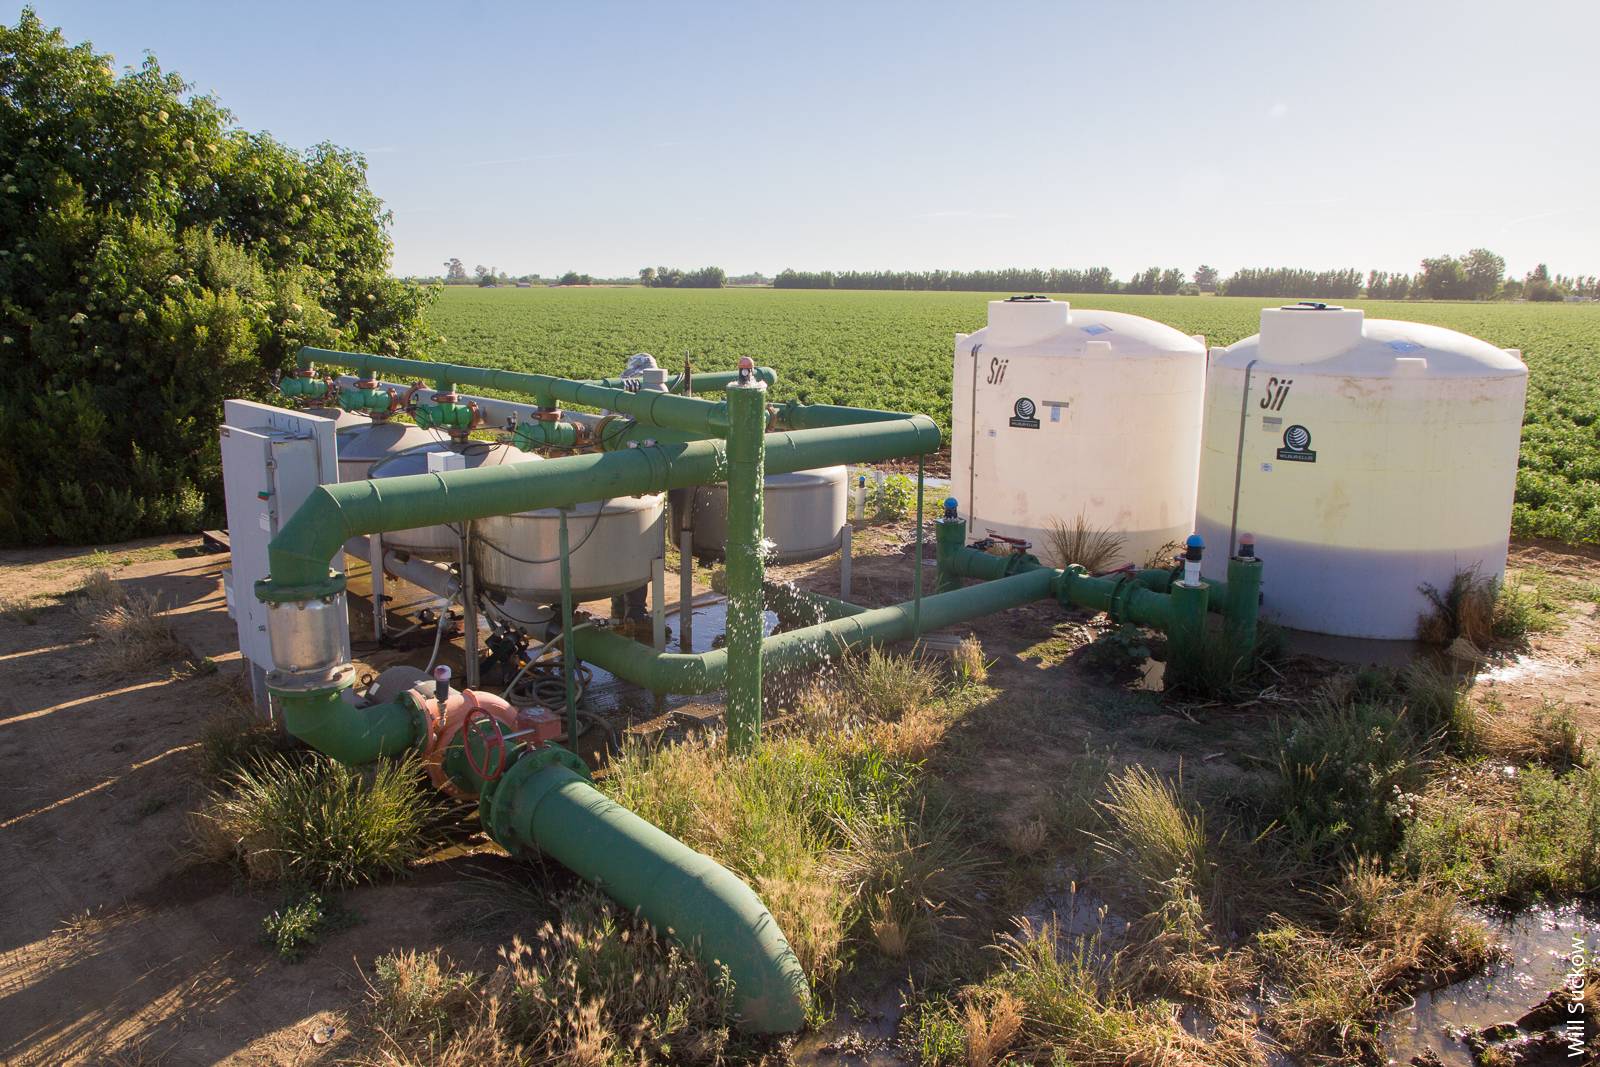 Groundwater pump and filtration equipment sit adjacent to a tomato field in Yolo County.